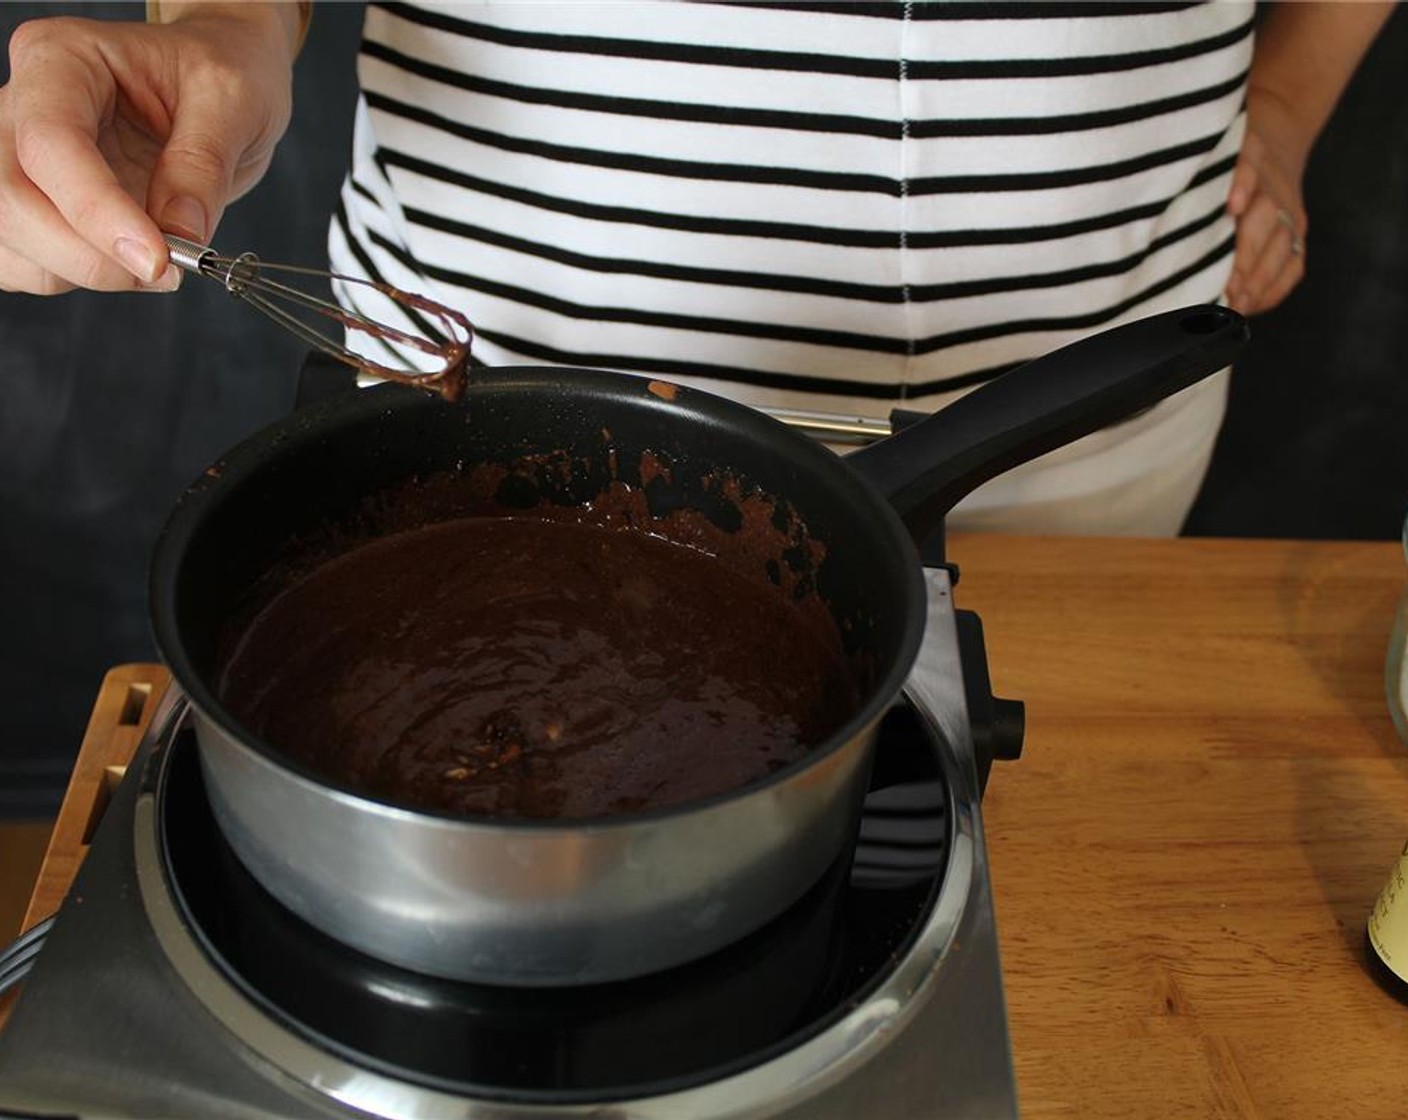 step 8 To make the frosting, heat a small saucepan over medium heat and whisk together the Buttermilk (3 Tbsp), Unsalted Butter (1/4 cup), and Unsweetened Cocoa Powder (1/4 cup).